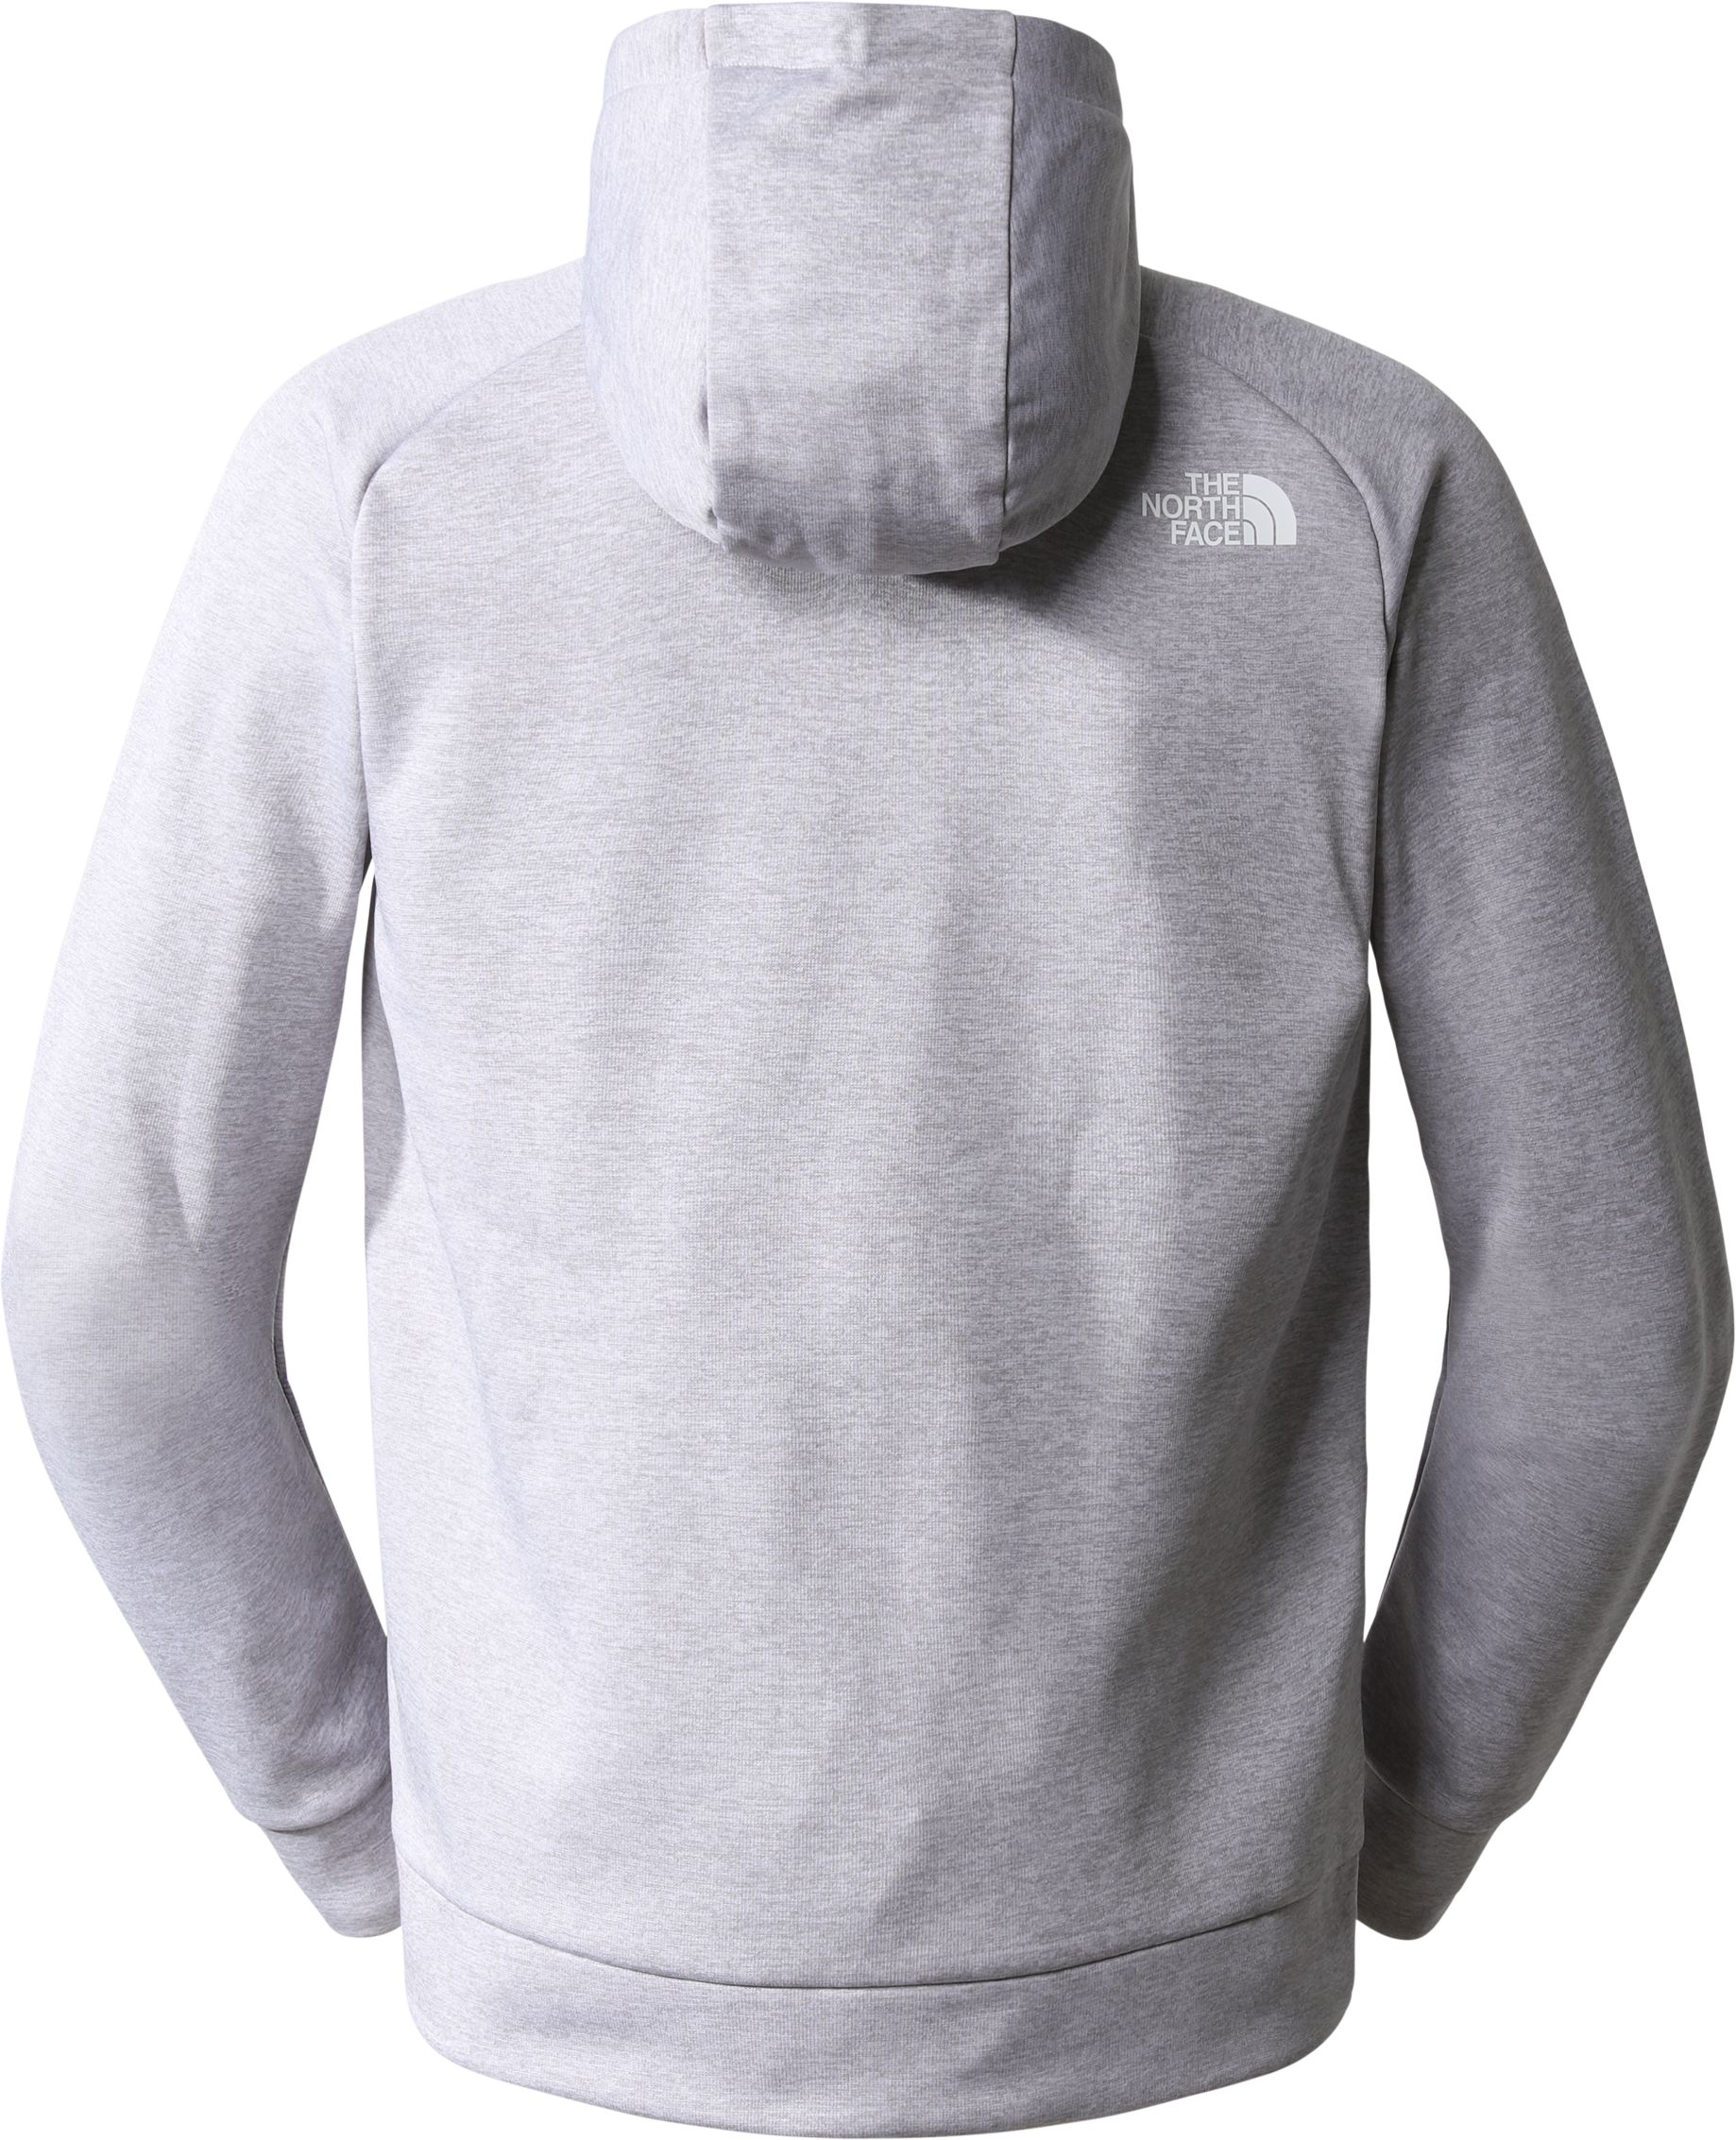 THE NORTH FACE, M REAXION FLEECE F/Z HOODIE